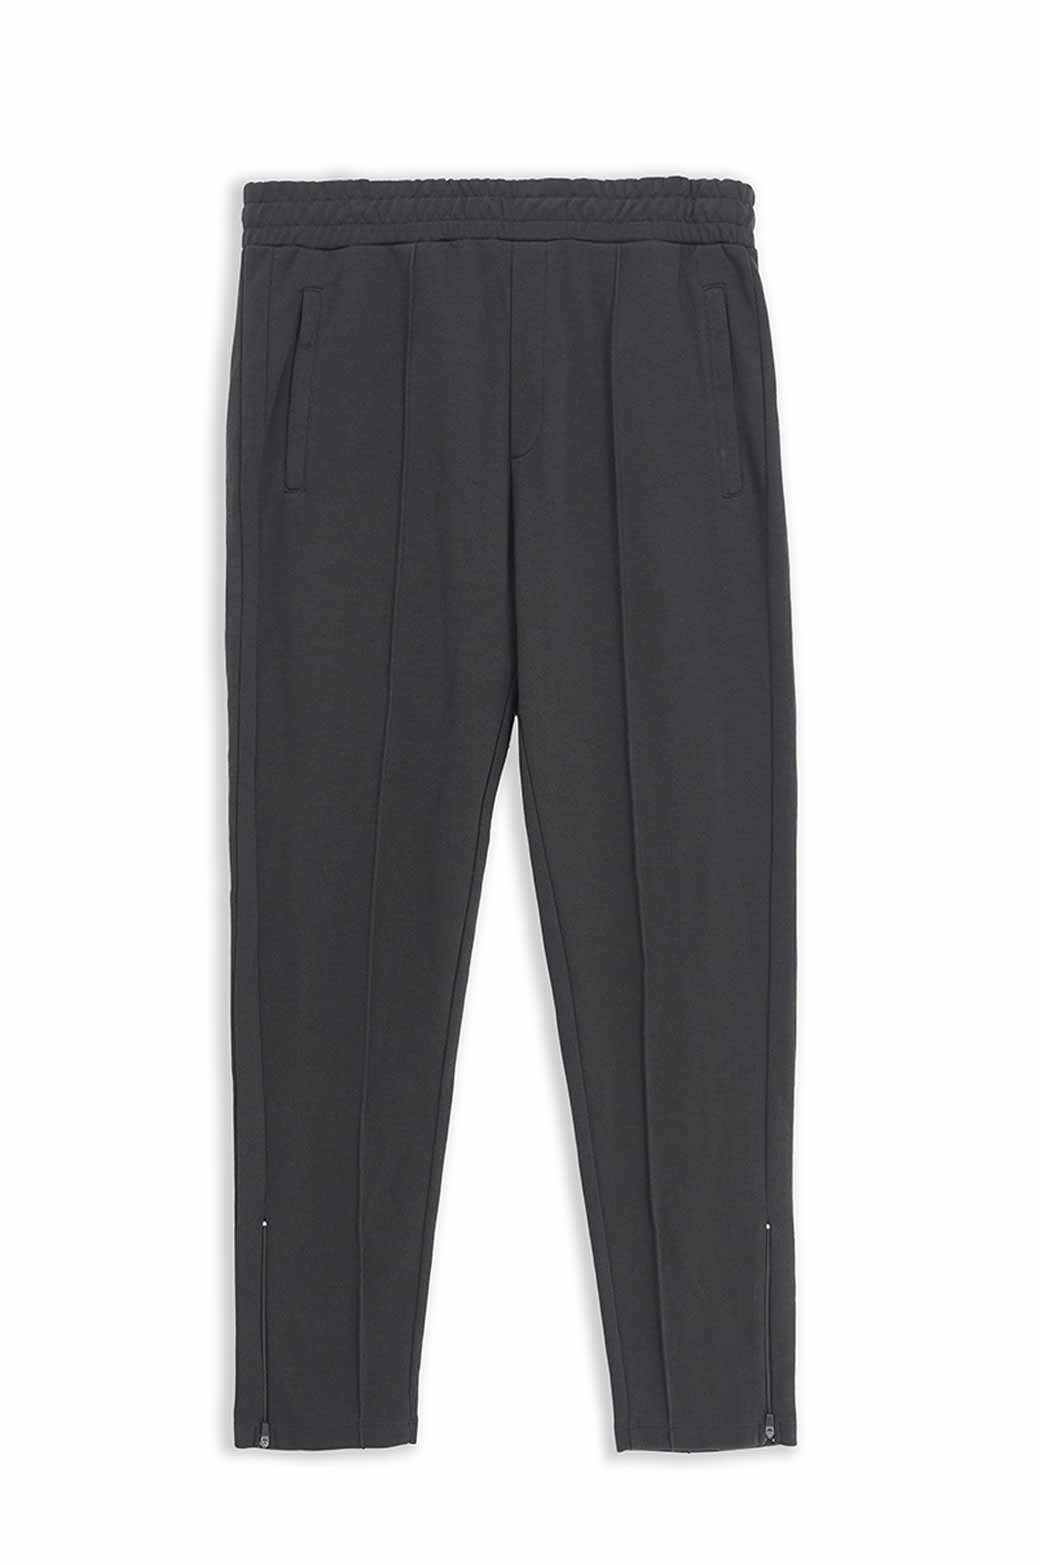 All BLACK TROUSER WITH SIDE PANEL